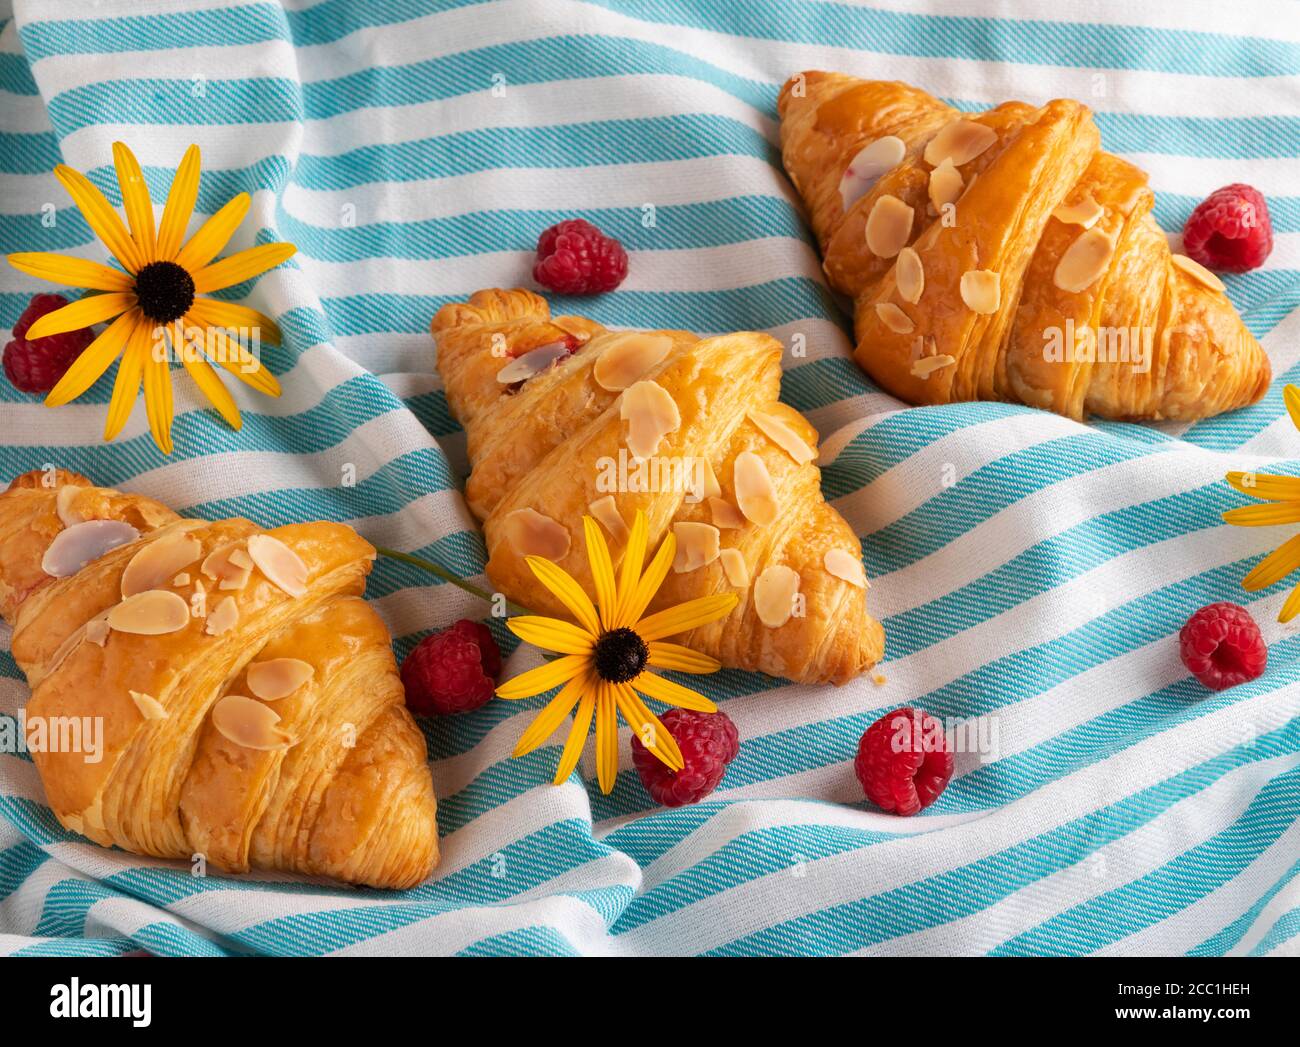 Yummy freshly three croissants with raspberries, view from above Stock Photo